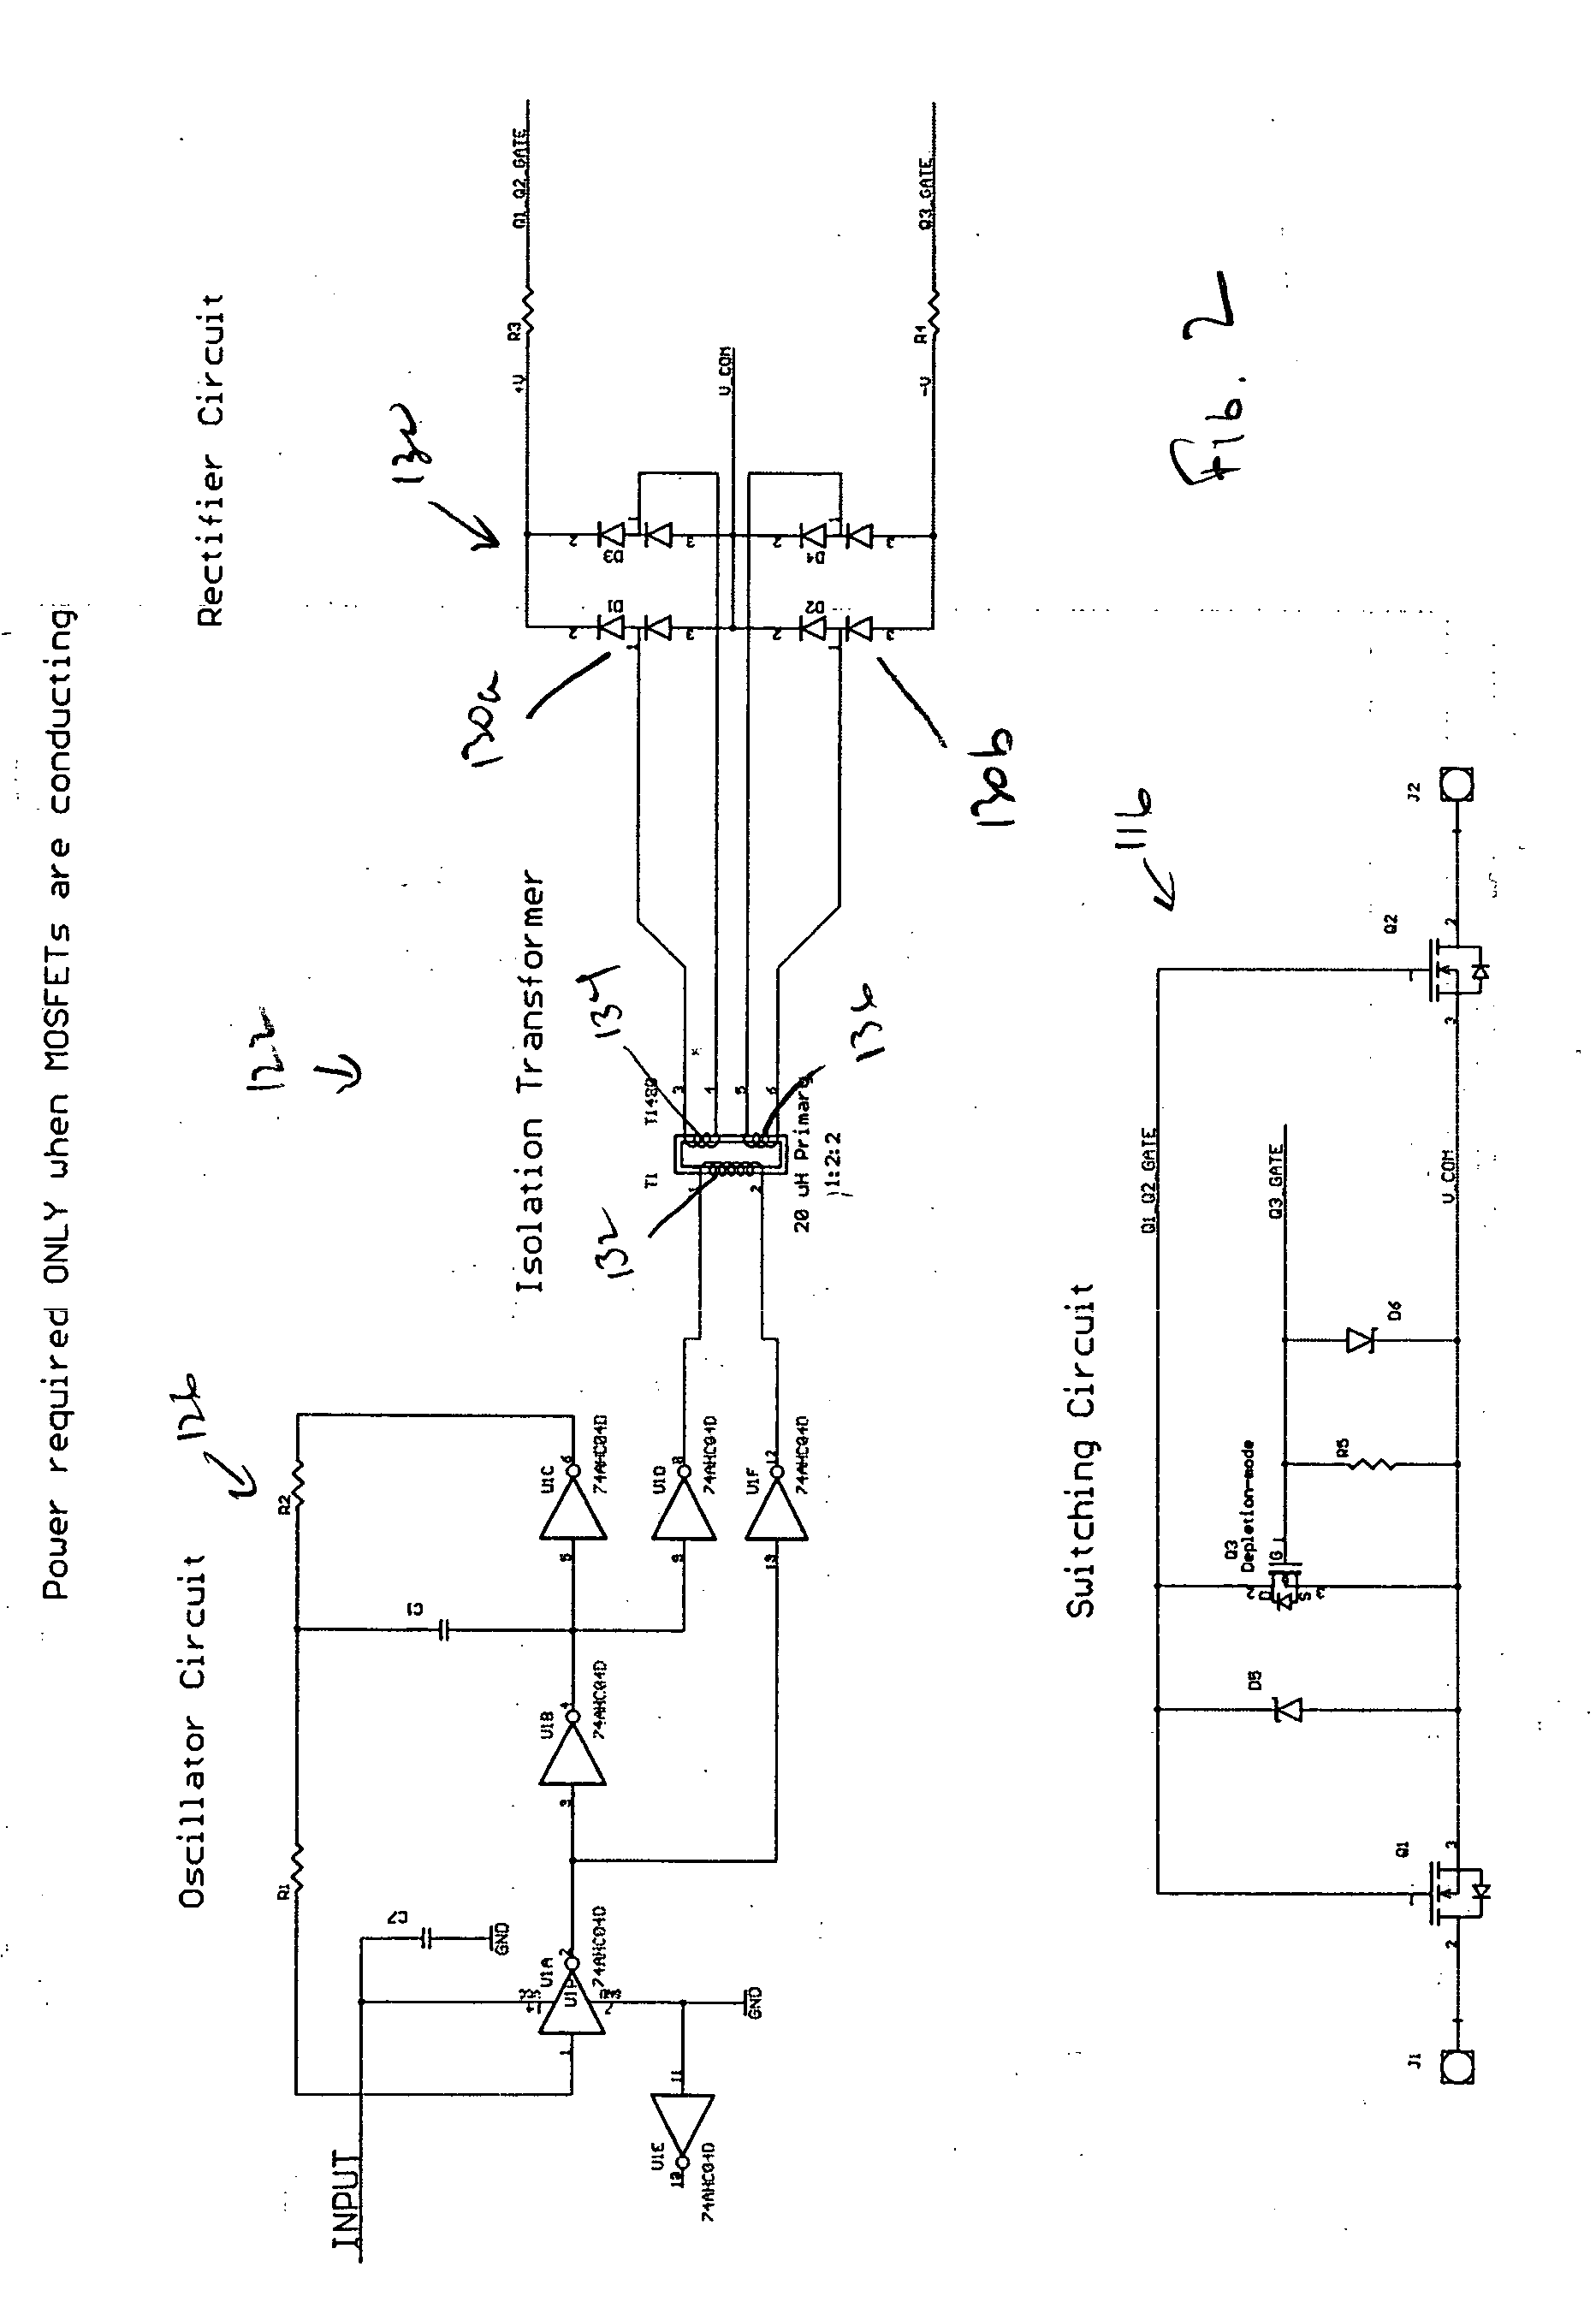 Driver system for MOSFET based, high voltage, electronic relays for AC power switching and inductive loads